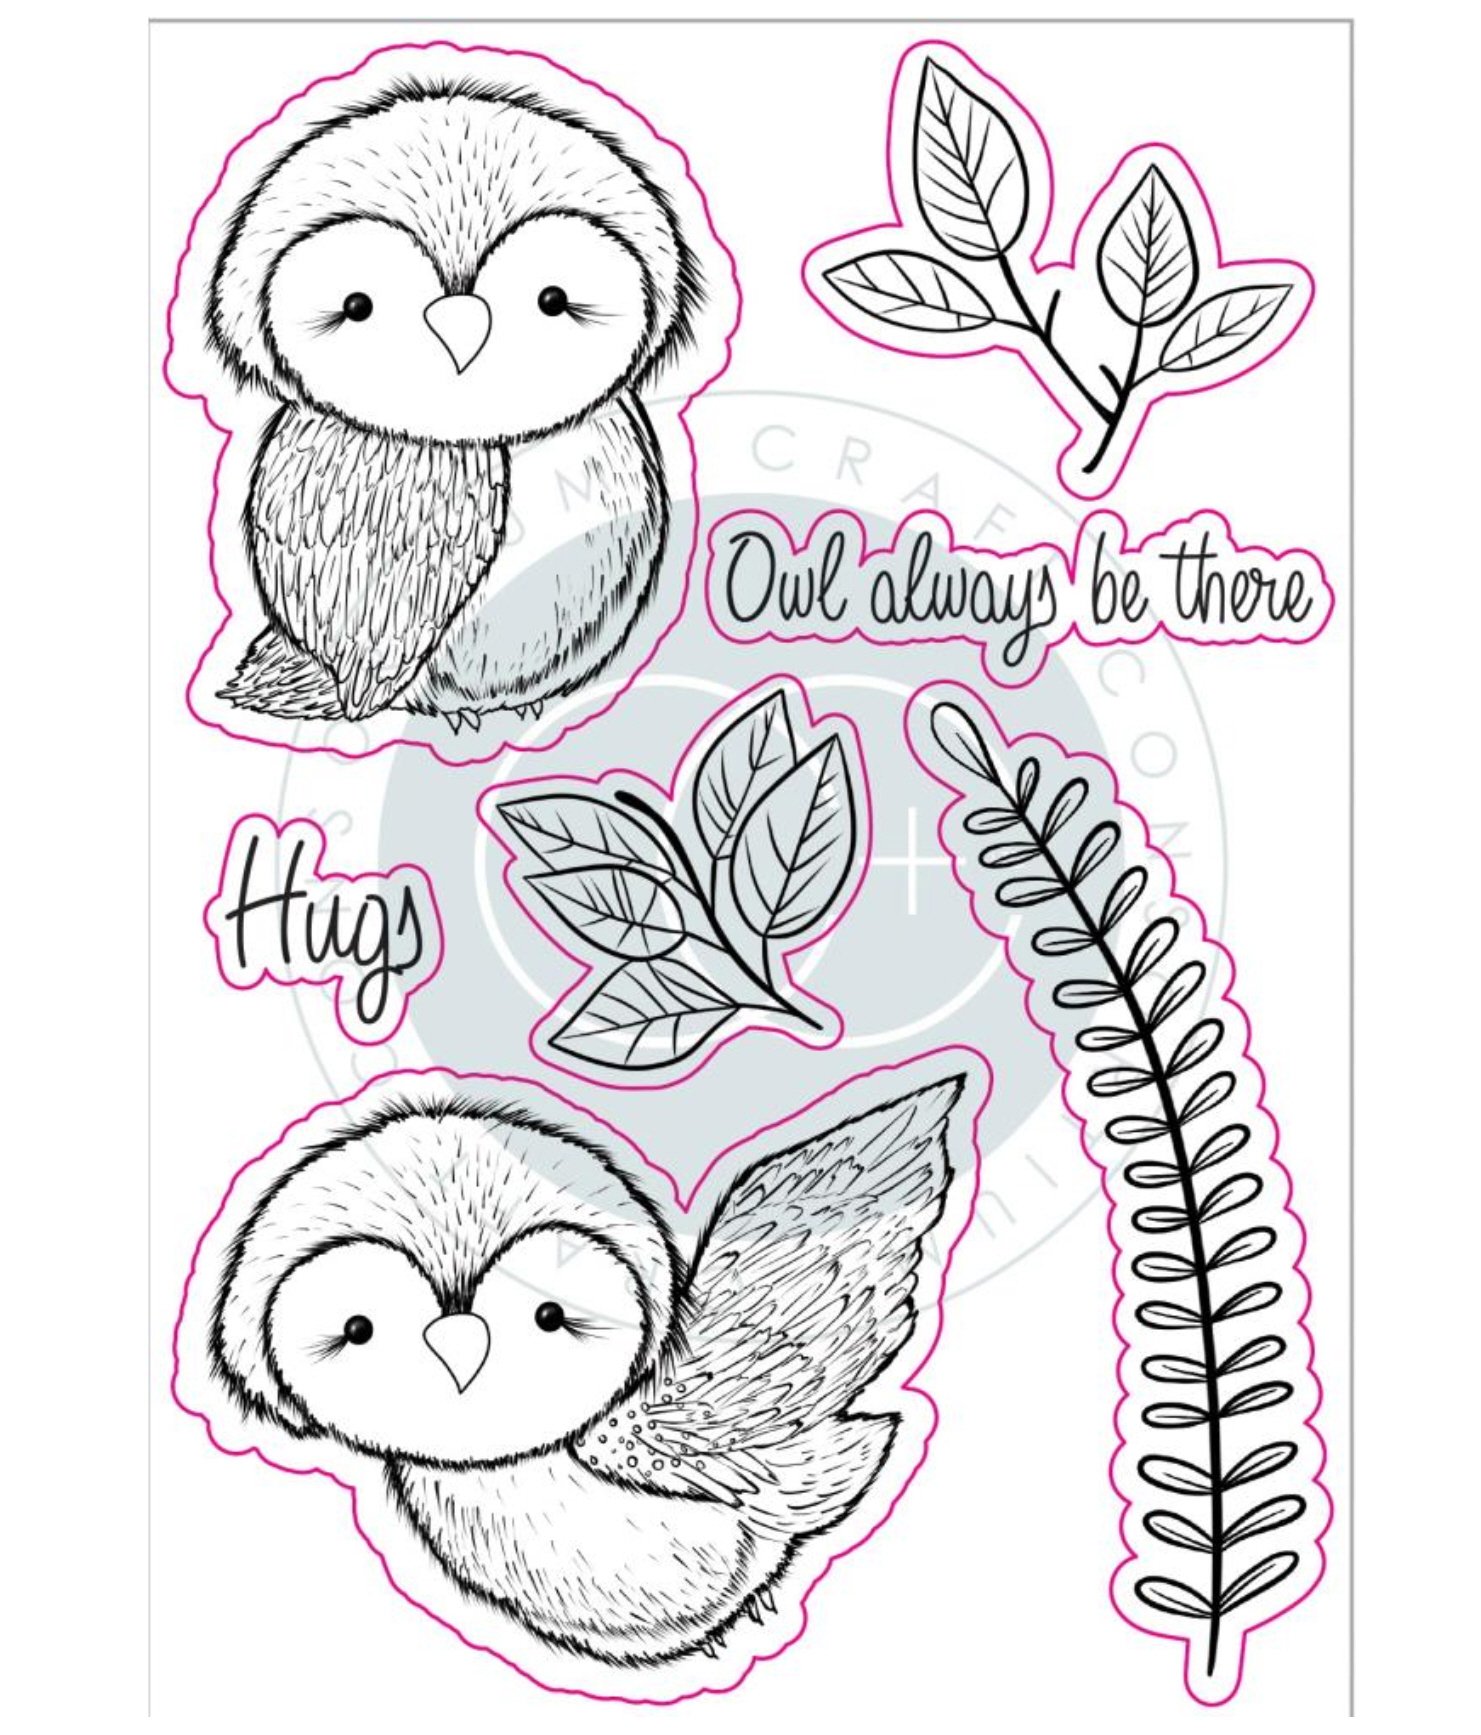 Silikonstempel Olivia the Owl Clear Stamps A5 10,5x15cm 7 Stempel 